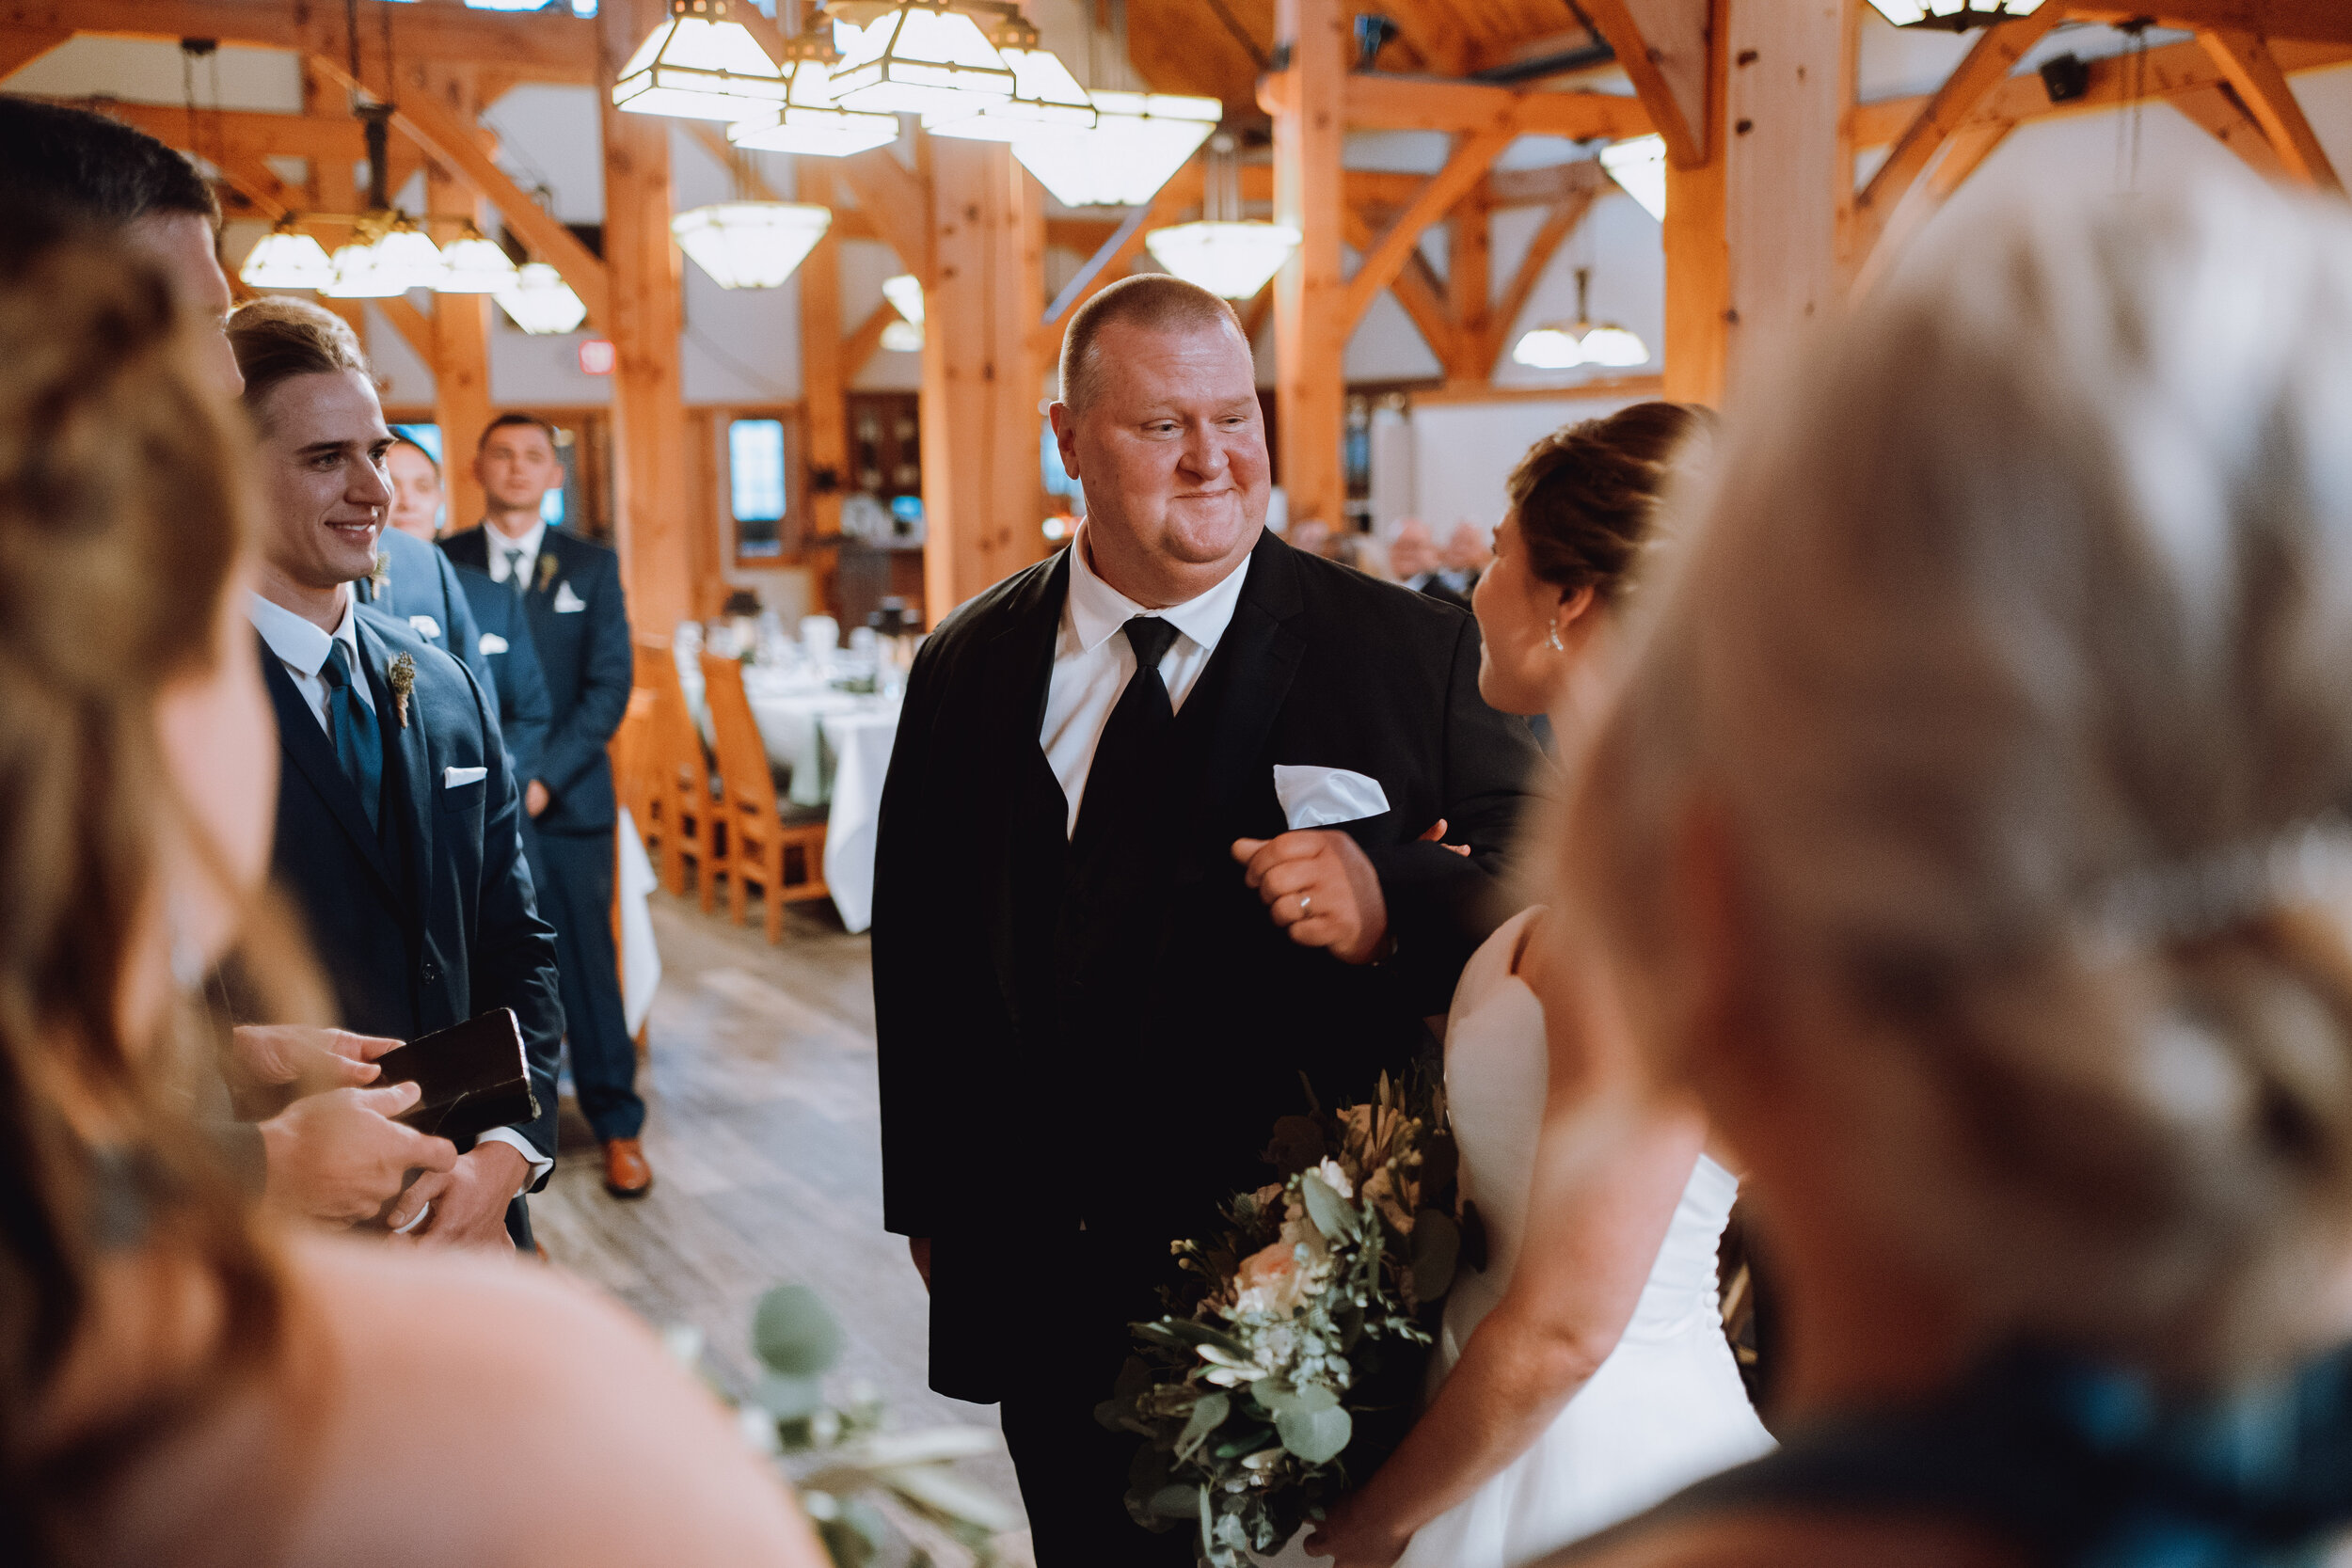 Wedding Hannah and Aaron at Timberlodge in Buffalo NY by Stefan Ludwig Photography-298.jpg